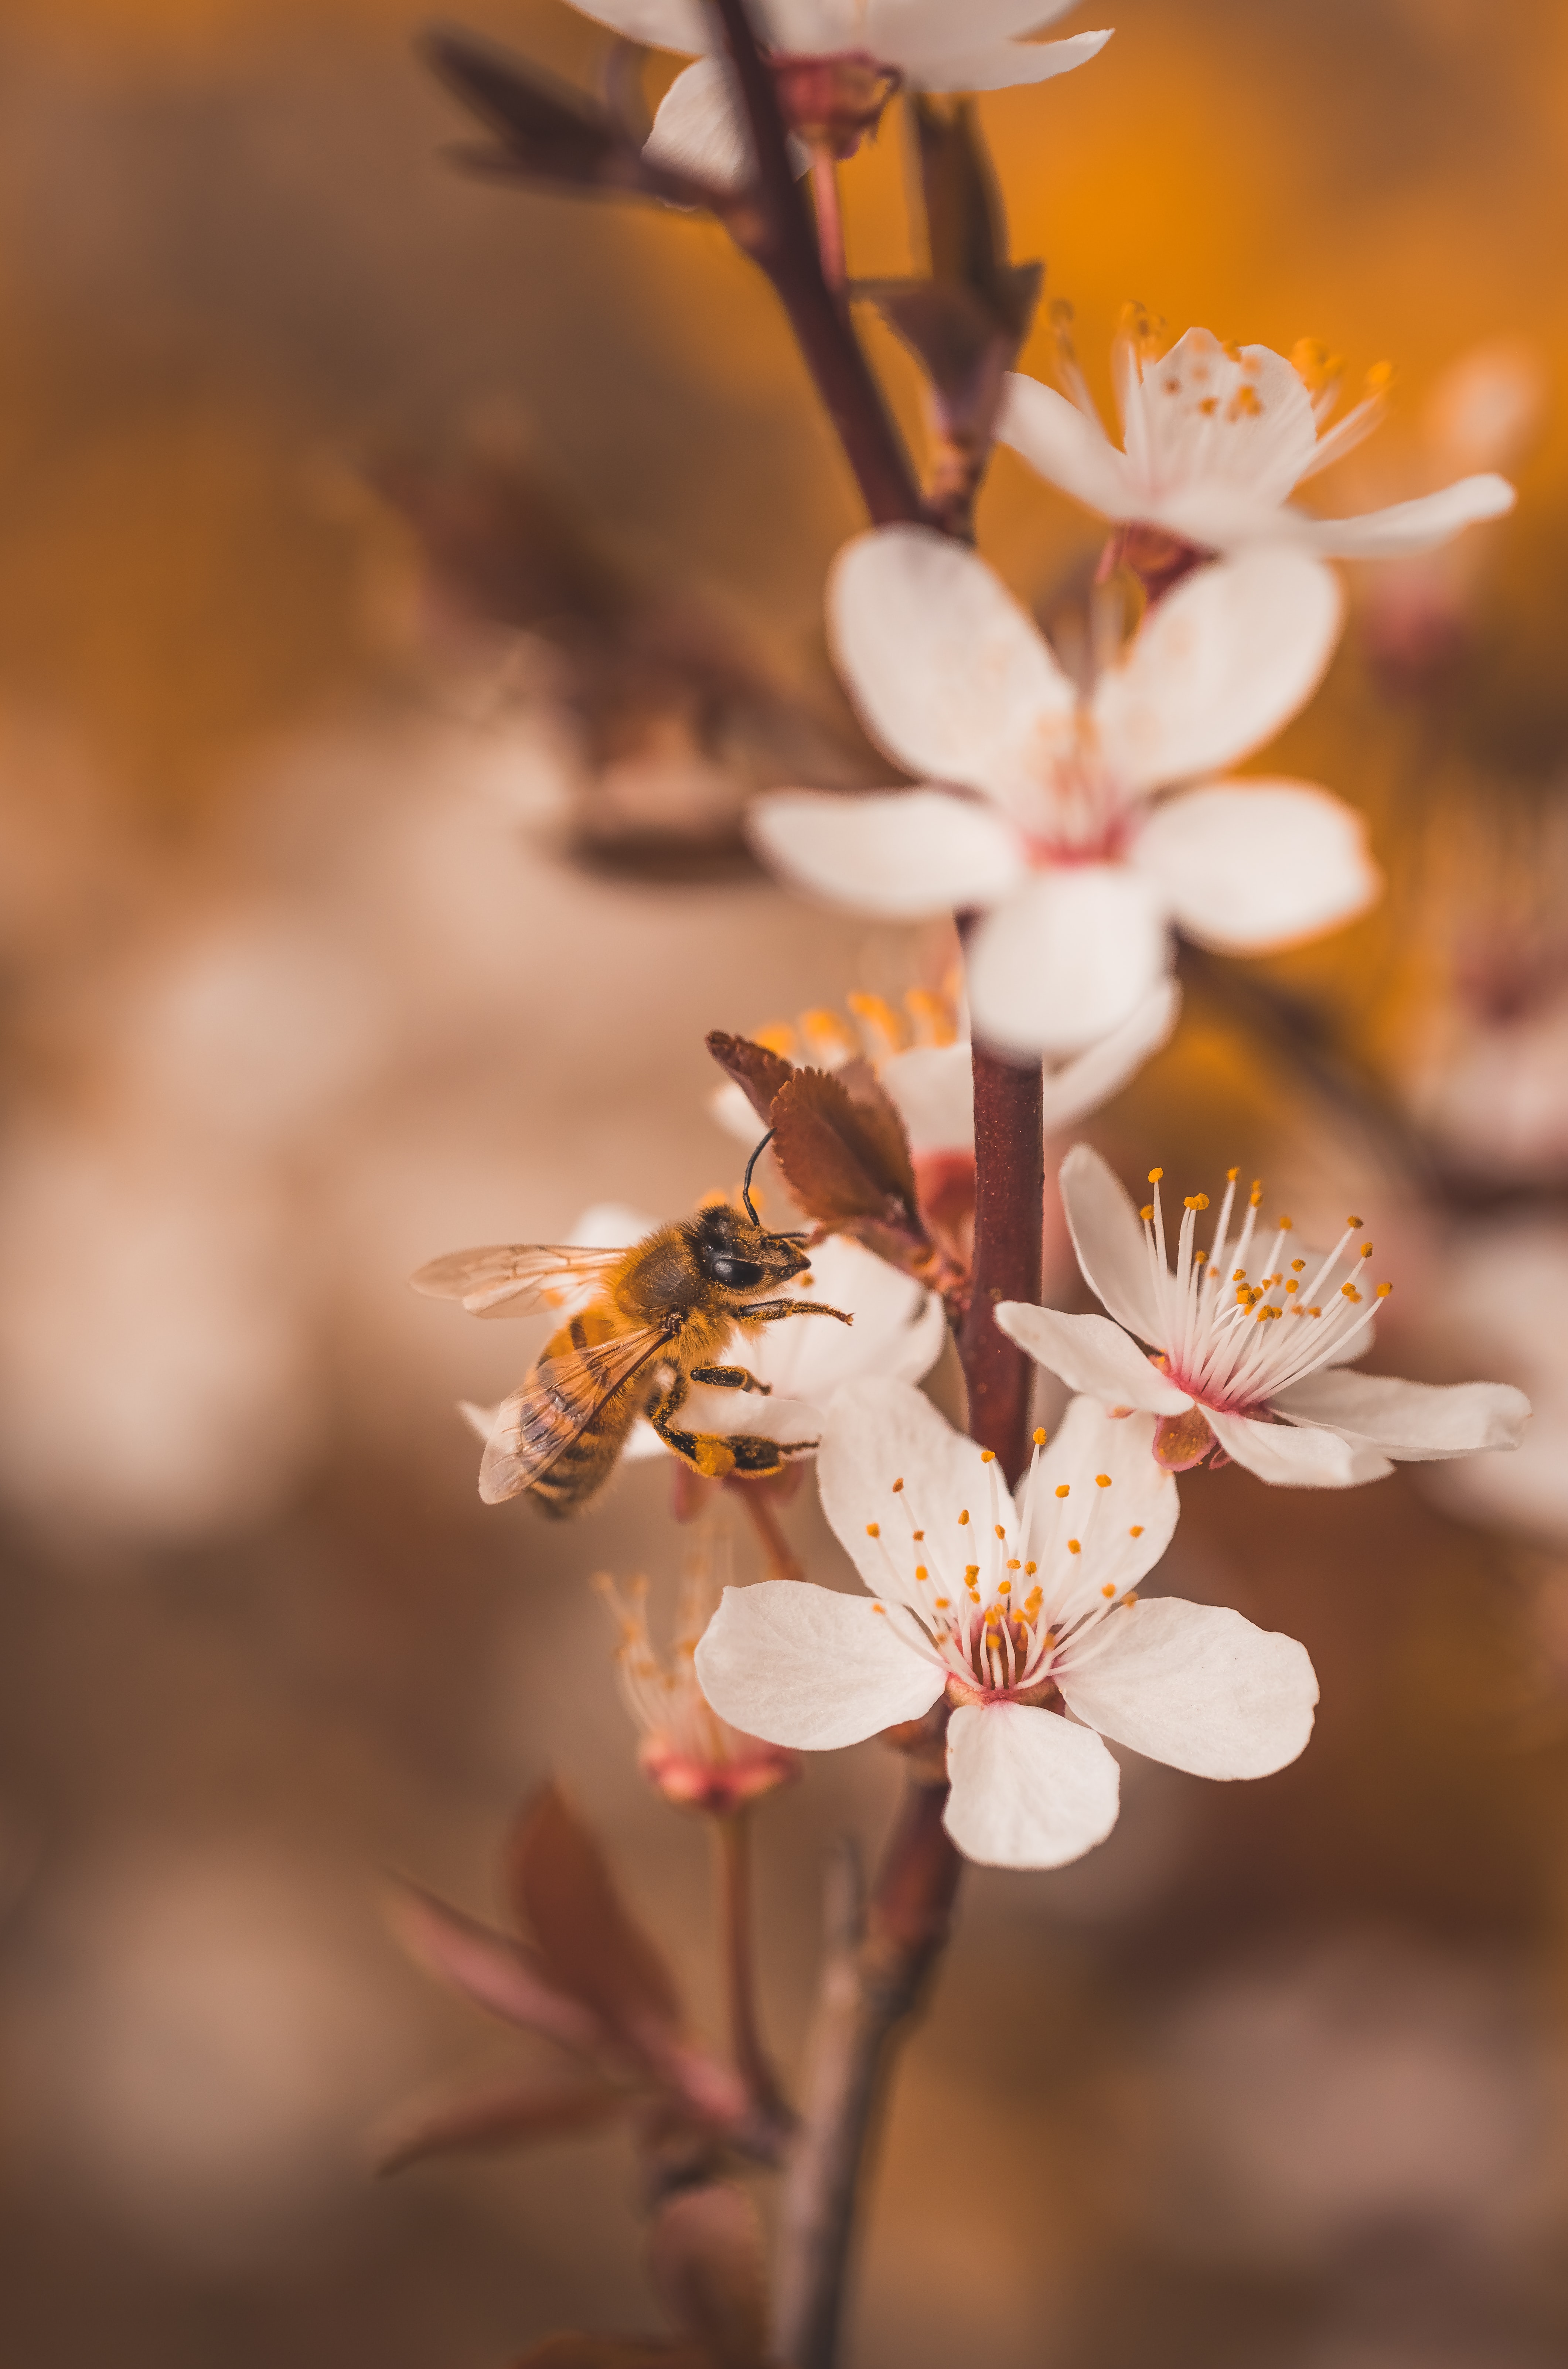 124776 Screensavers and Wallpapers Bee for phone. Download flowers, cherry, macro, branches, insect, bee pictures for free